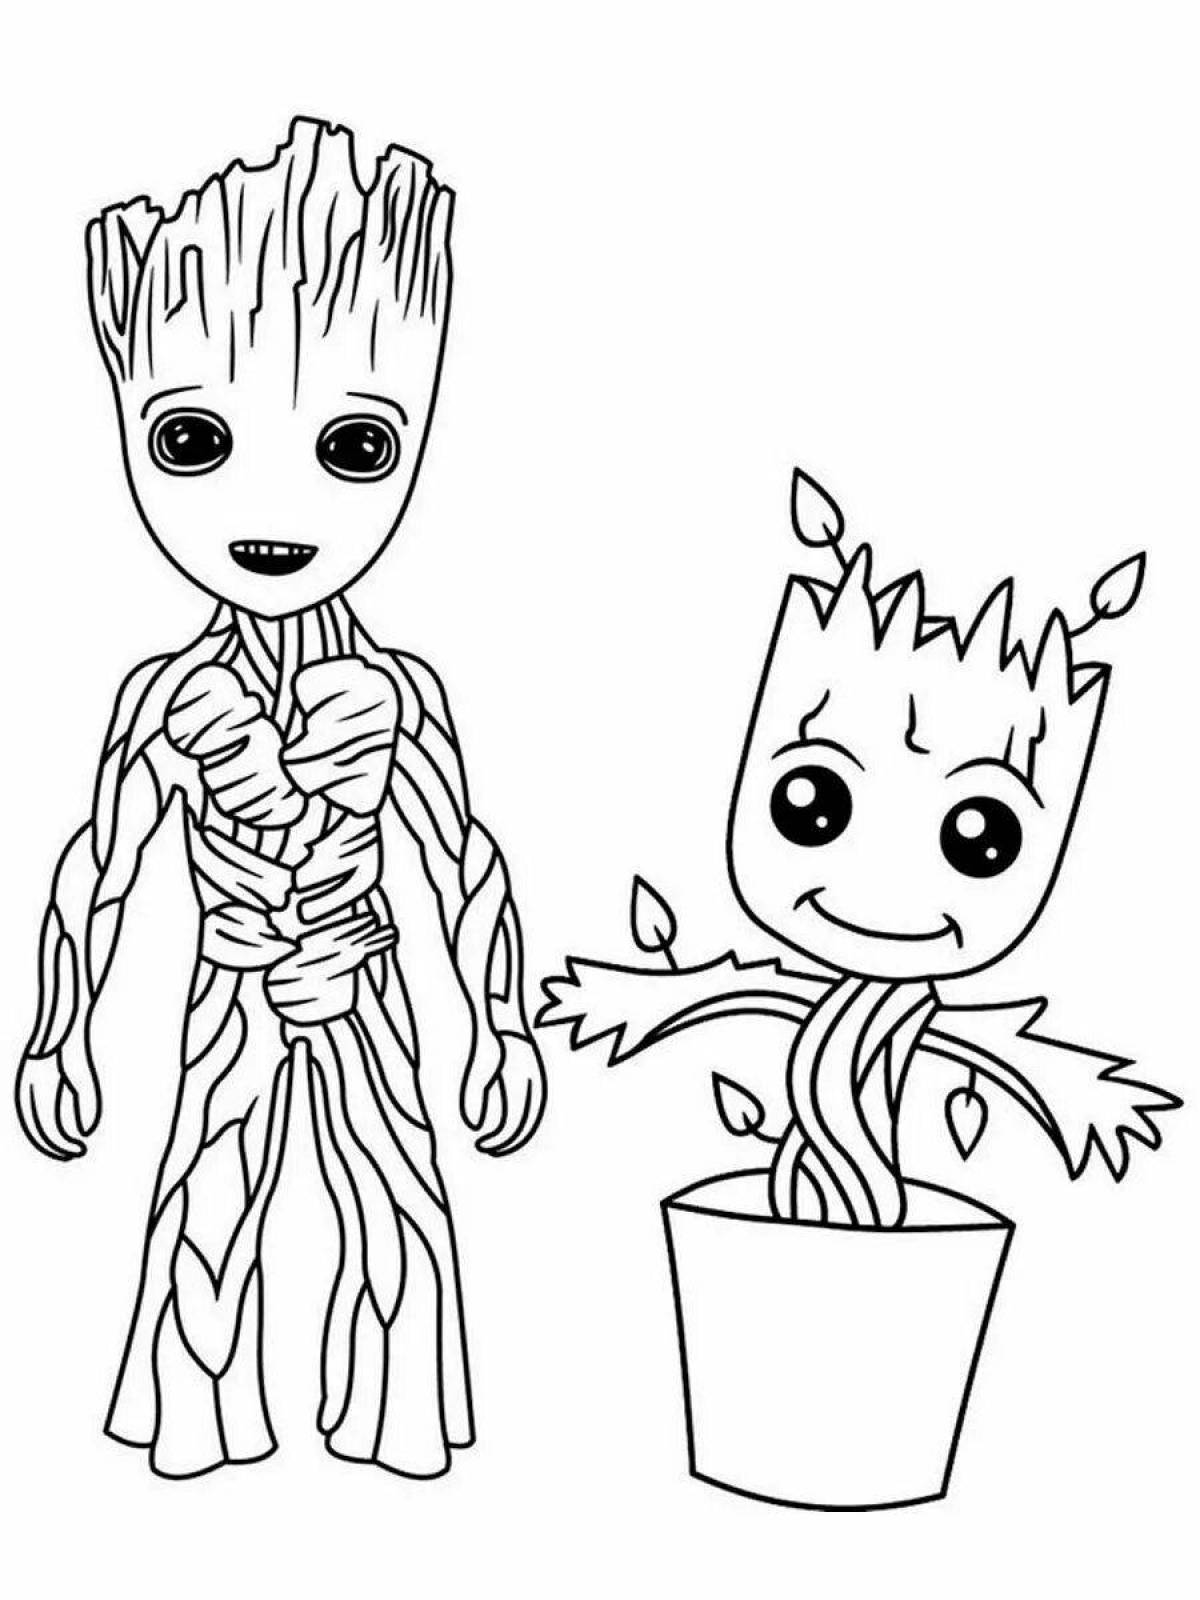 Groot and raccoon coloring book